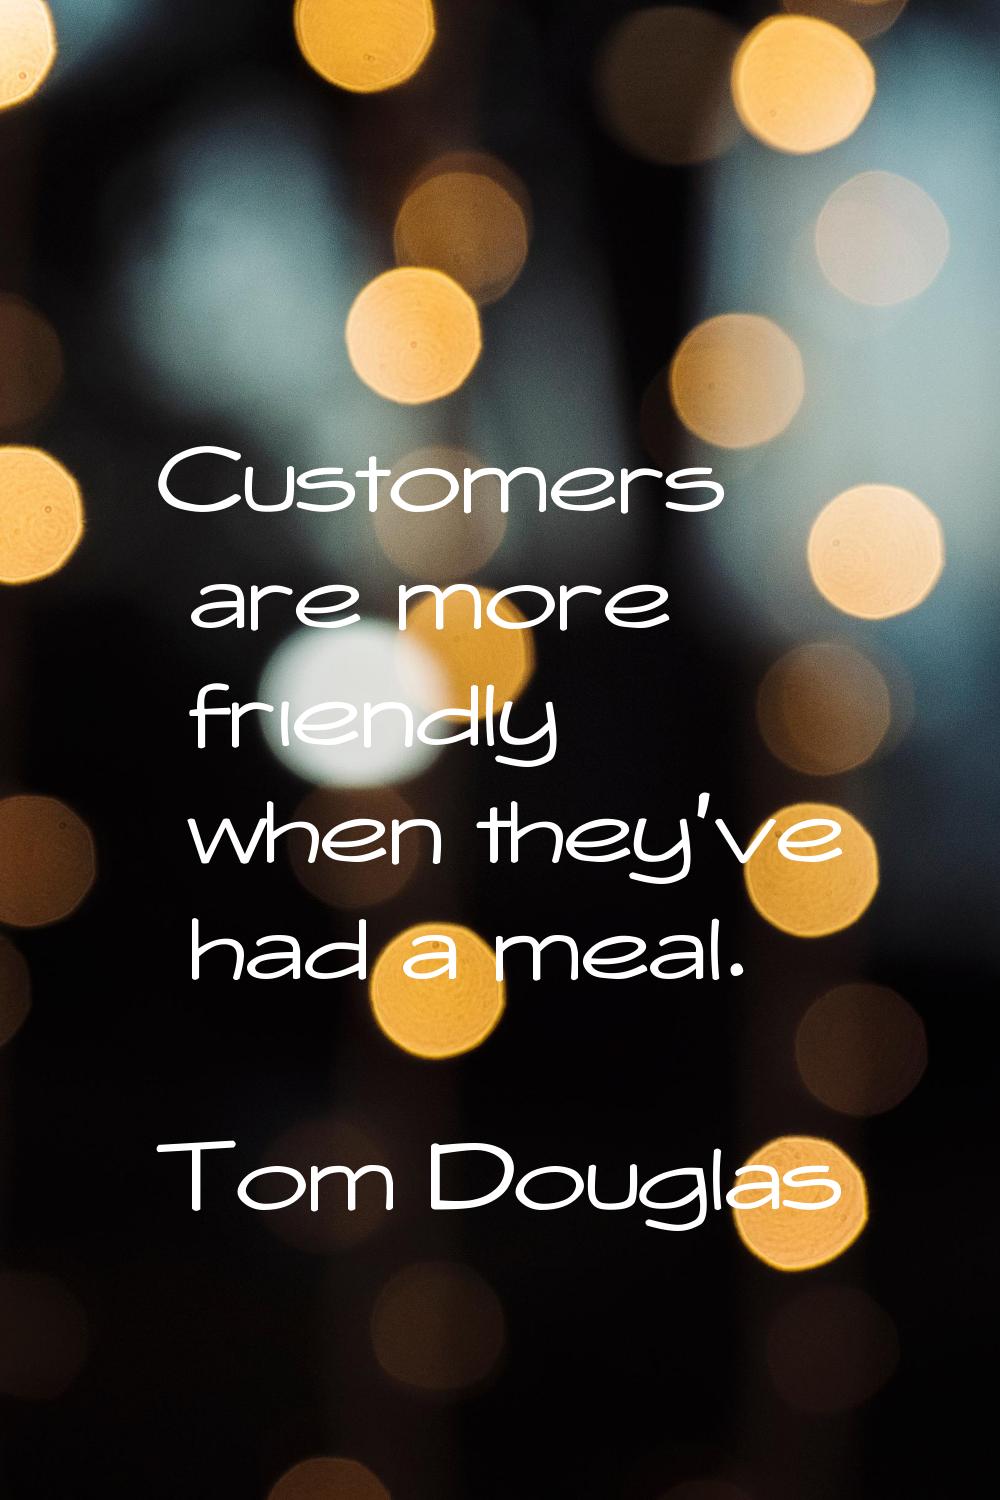 Customers are more friendly when they've had a meal.